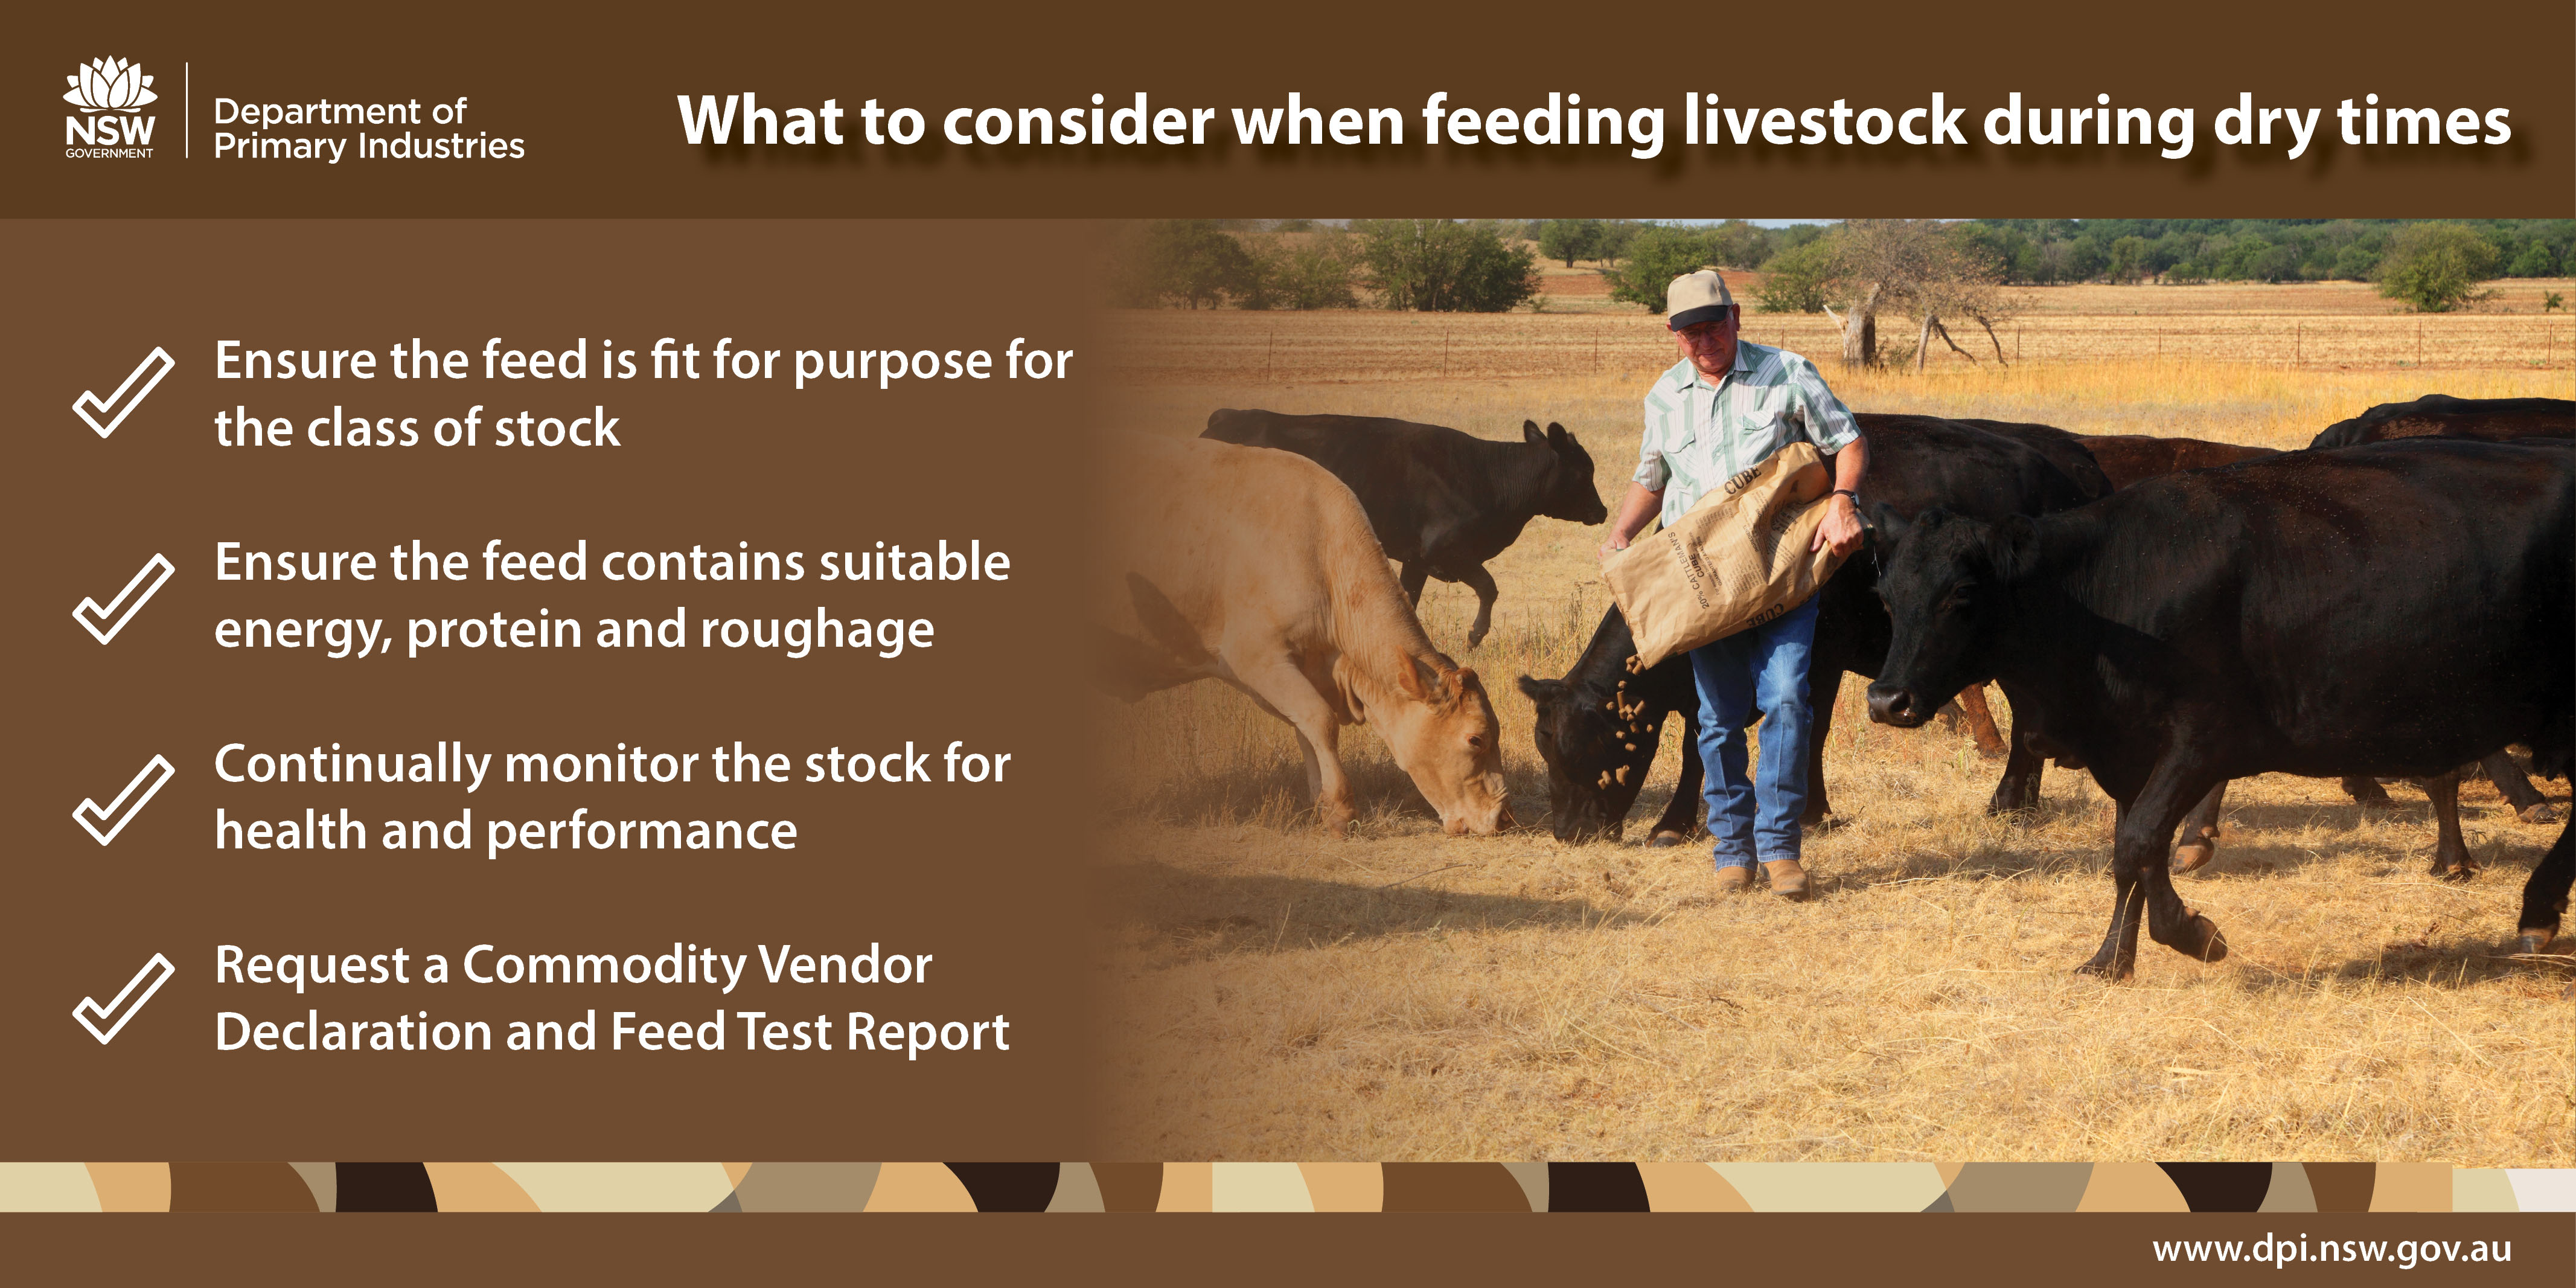 What to consider when feeding livestock during dry times: ensure the feed is fit for purpose for the class of stock, ensure the feed contains suitable energy, protein and roughage, continually monitor the stock for health and performance, and request a Commodity Vendor Declaration and Feed Test Report.